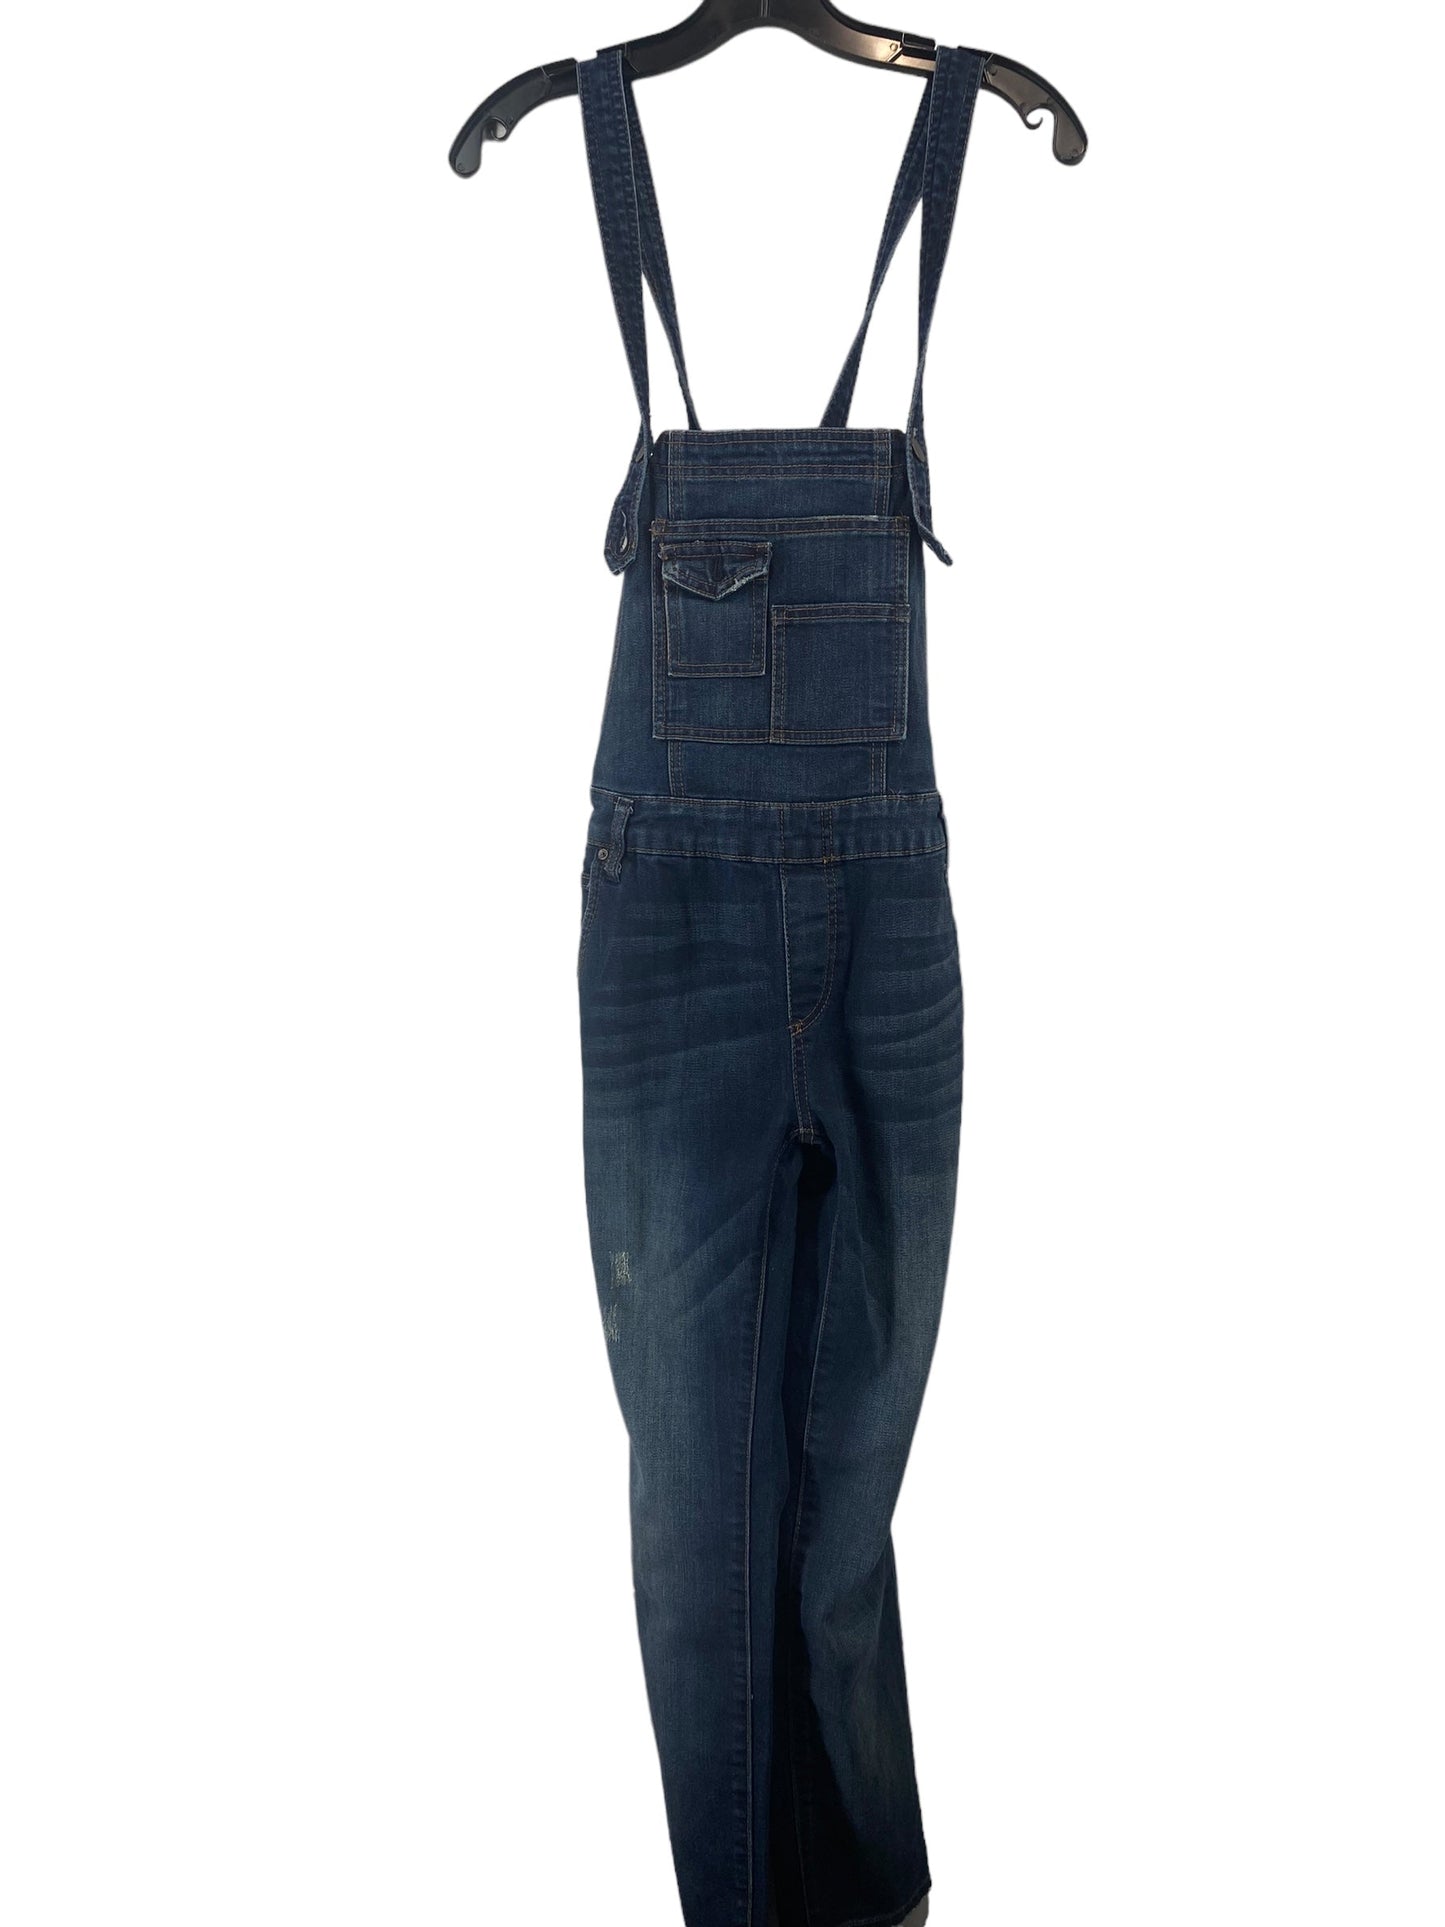 Blue Denim Overalls Free People, Size 26